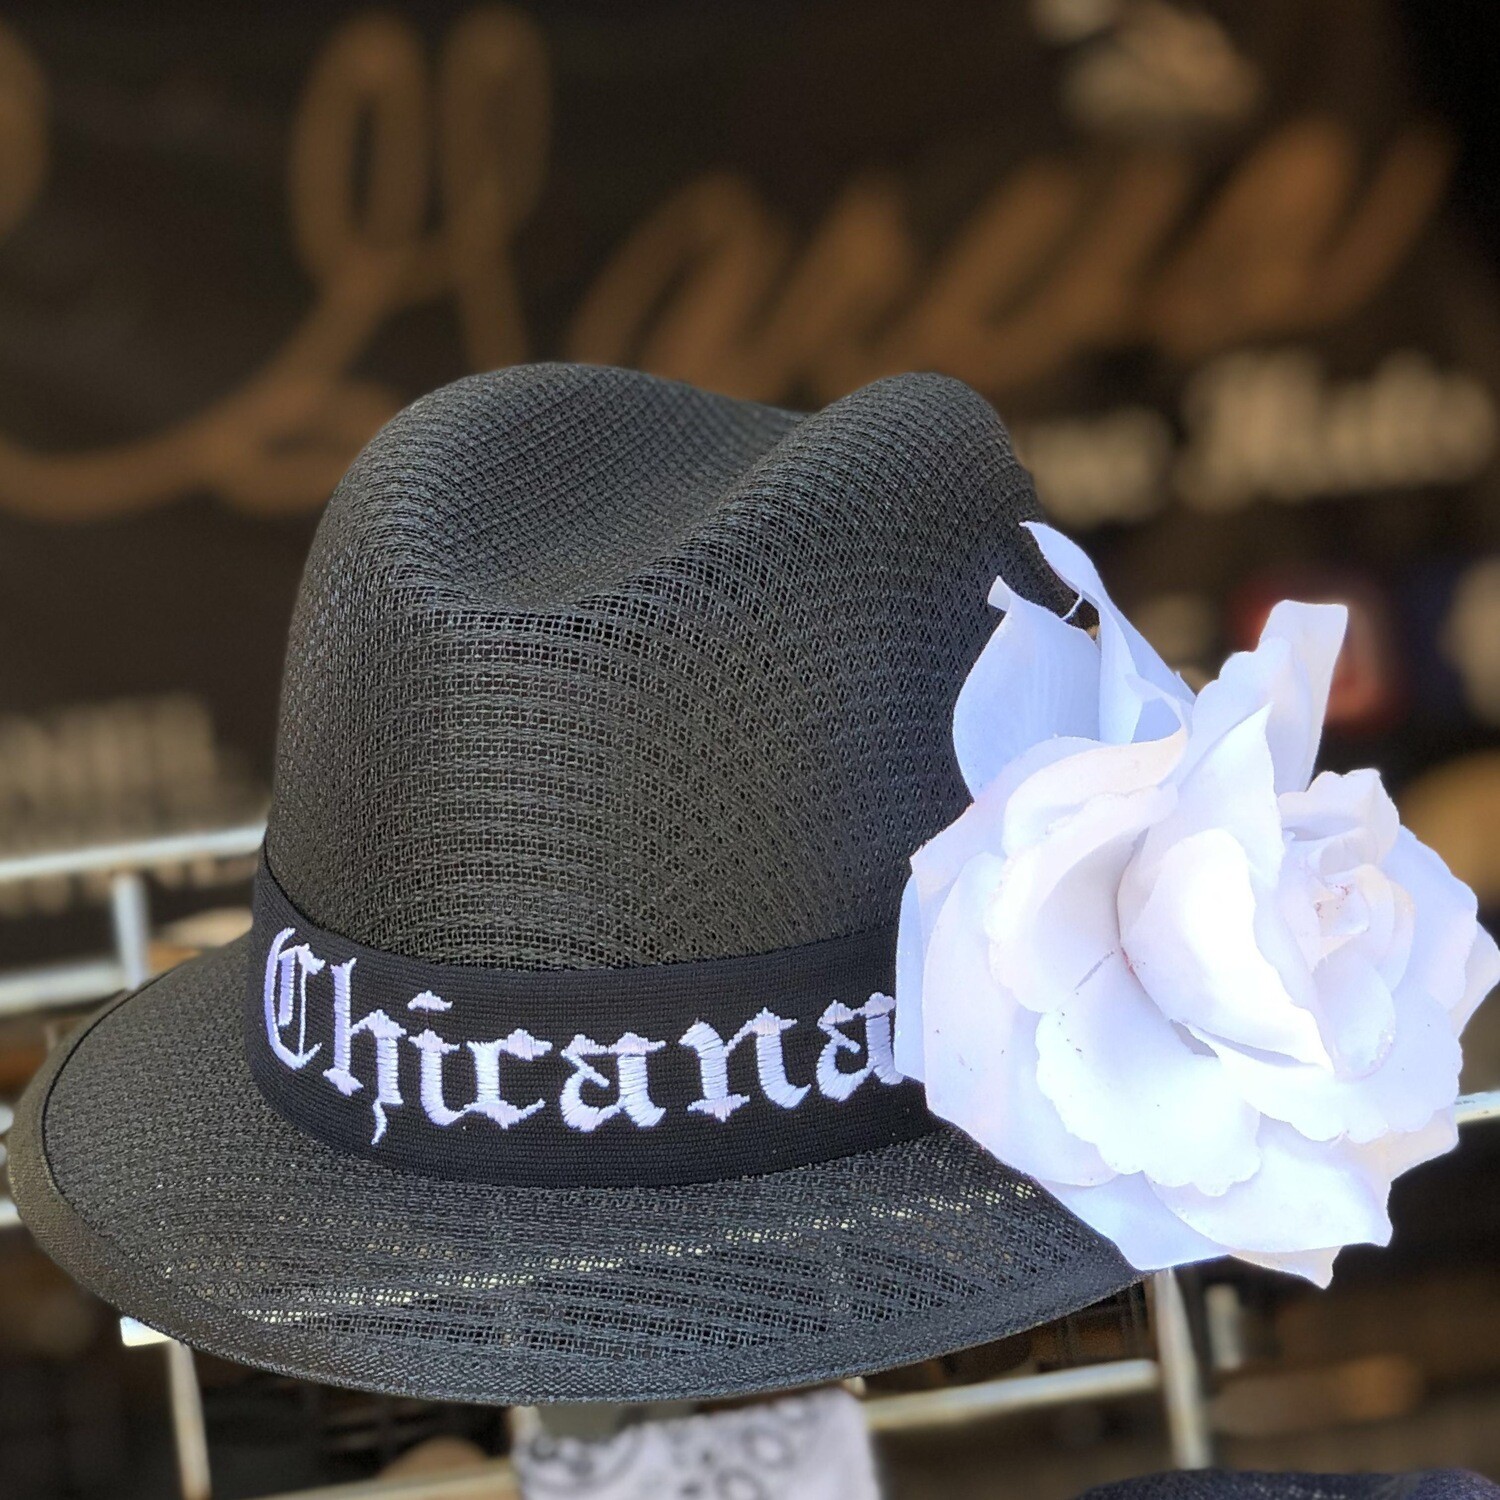 Black Derby w/ Chicana Embroidery & White Rose